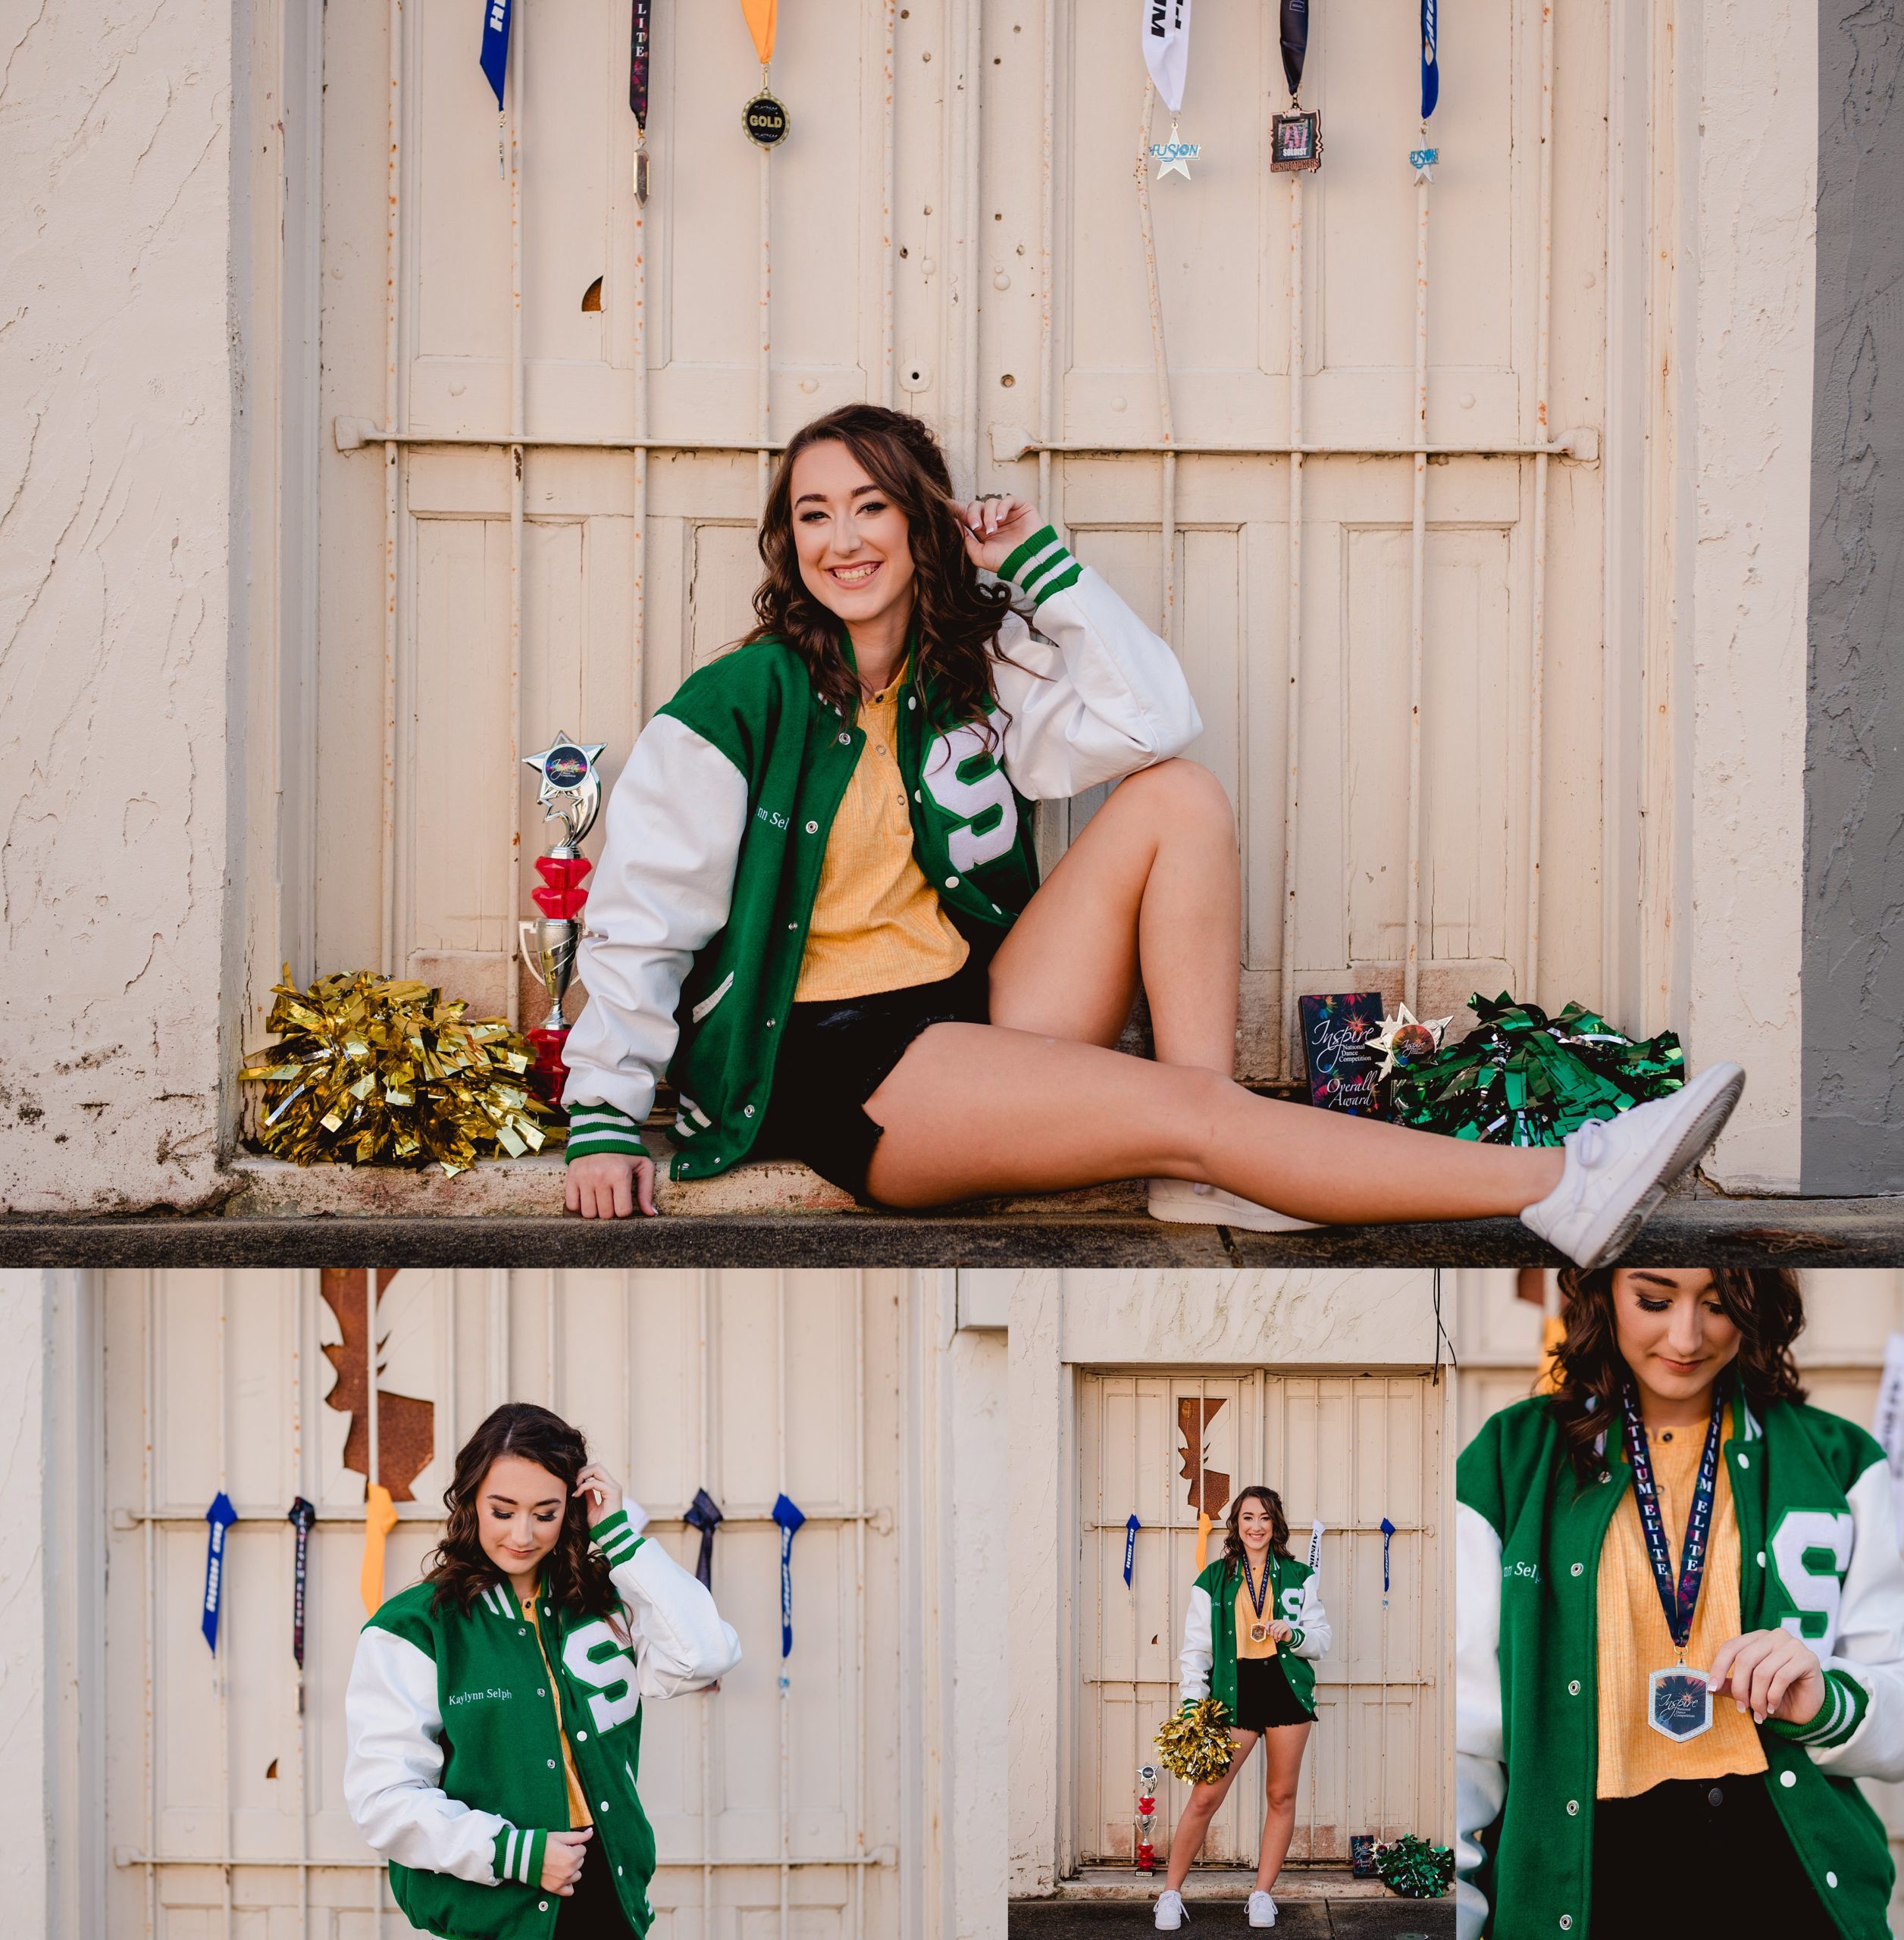 Senior pictures using letterman jacket, medals, and trophies.